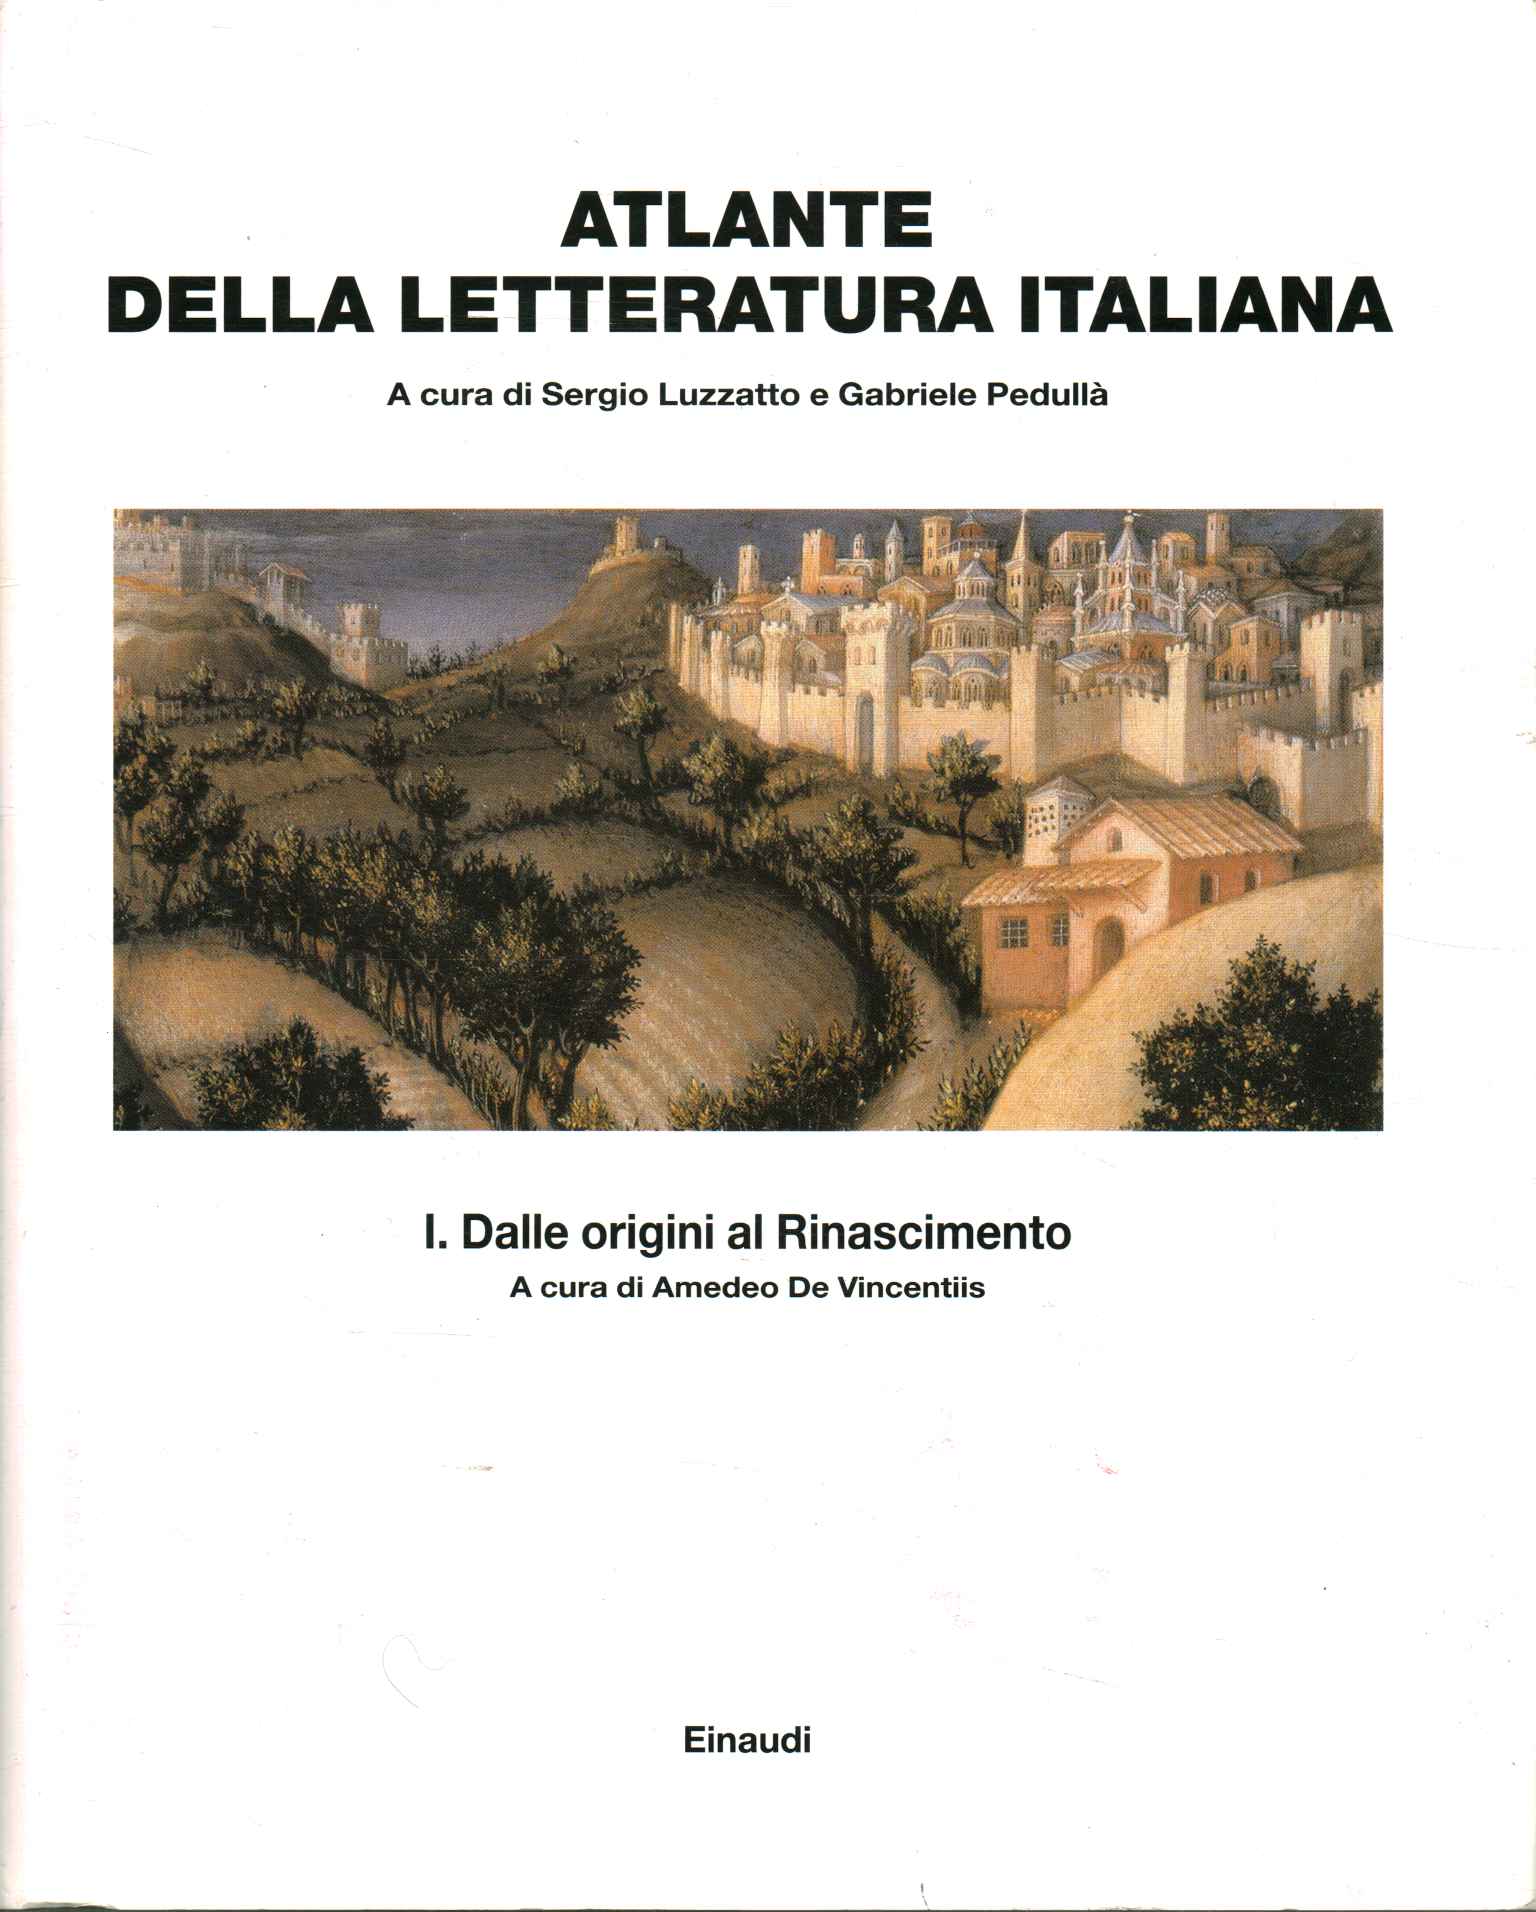 Atlas of Italian literature. Give her%